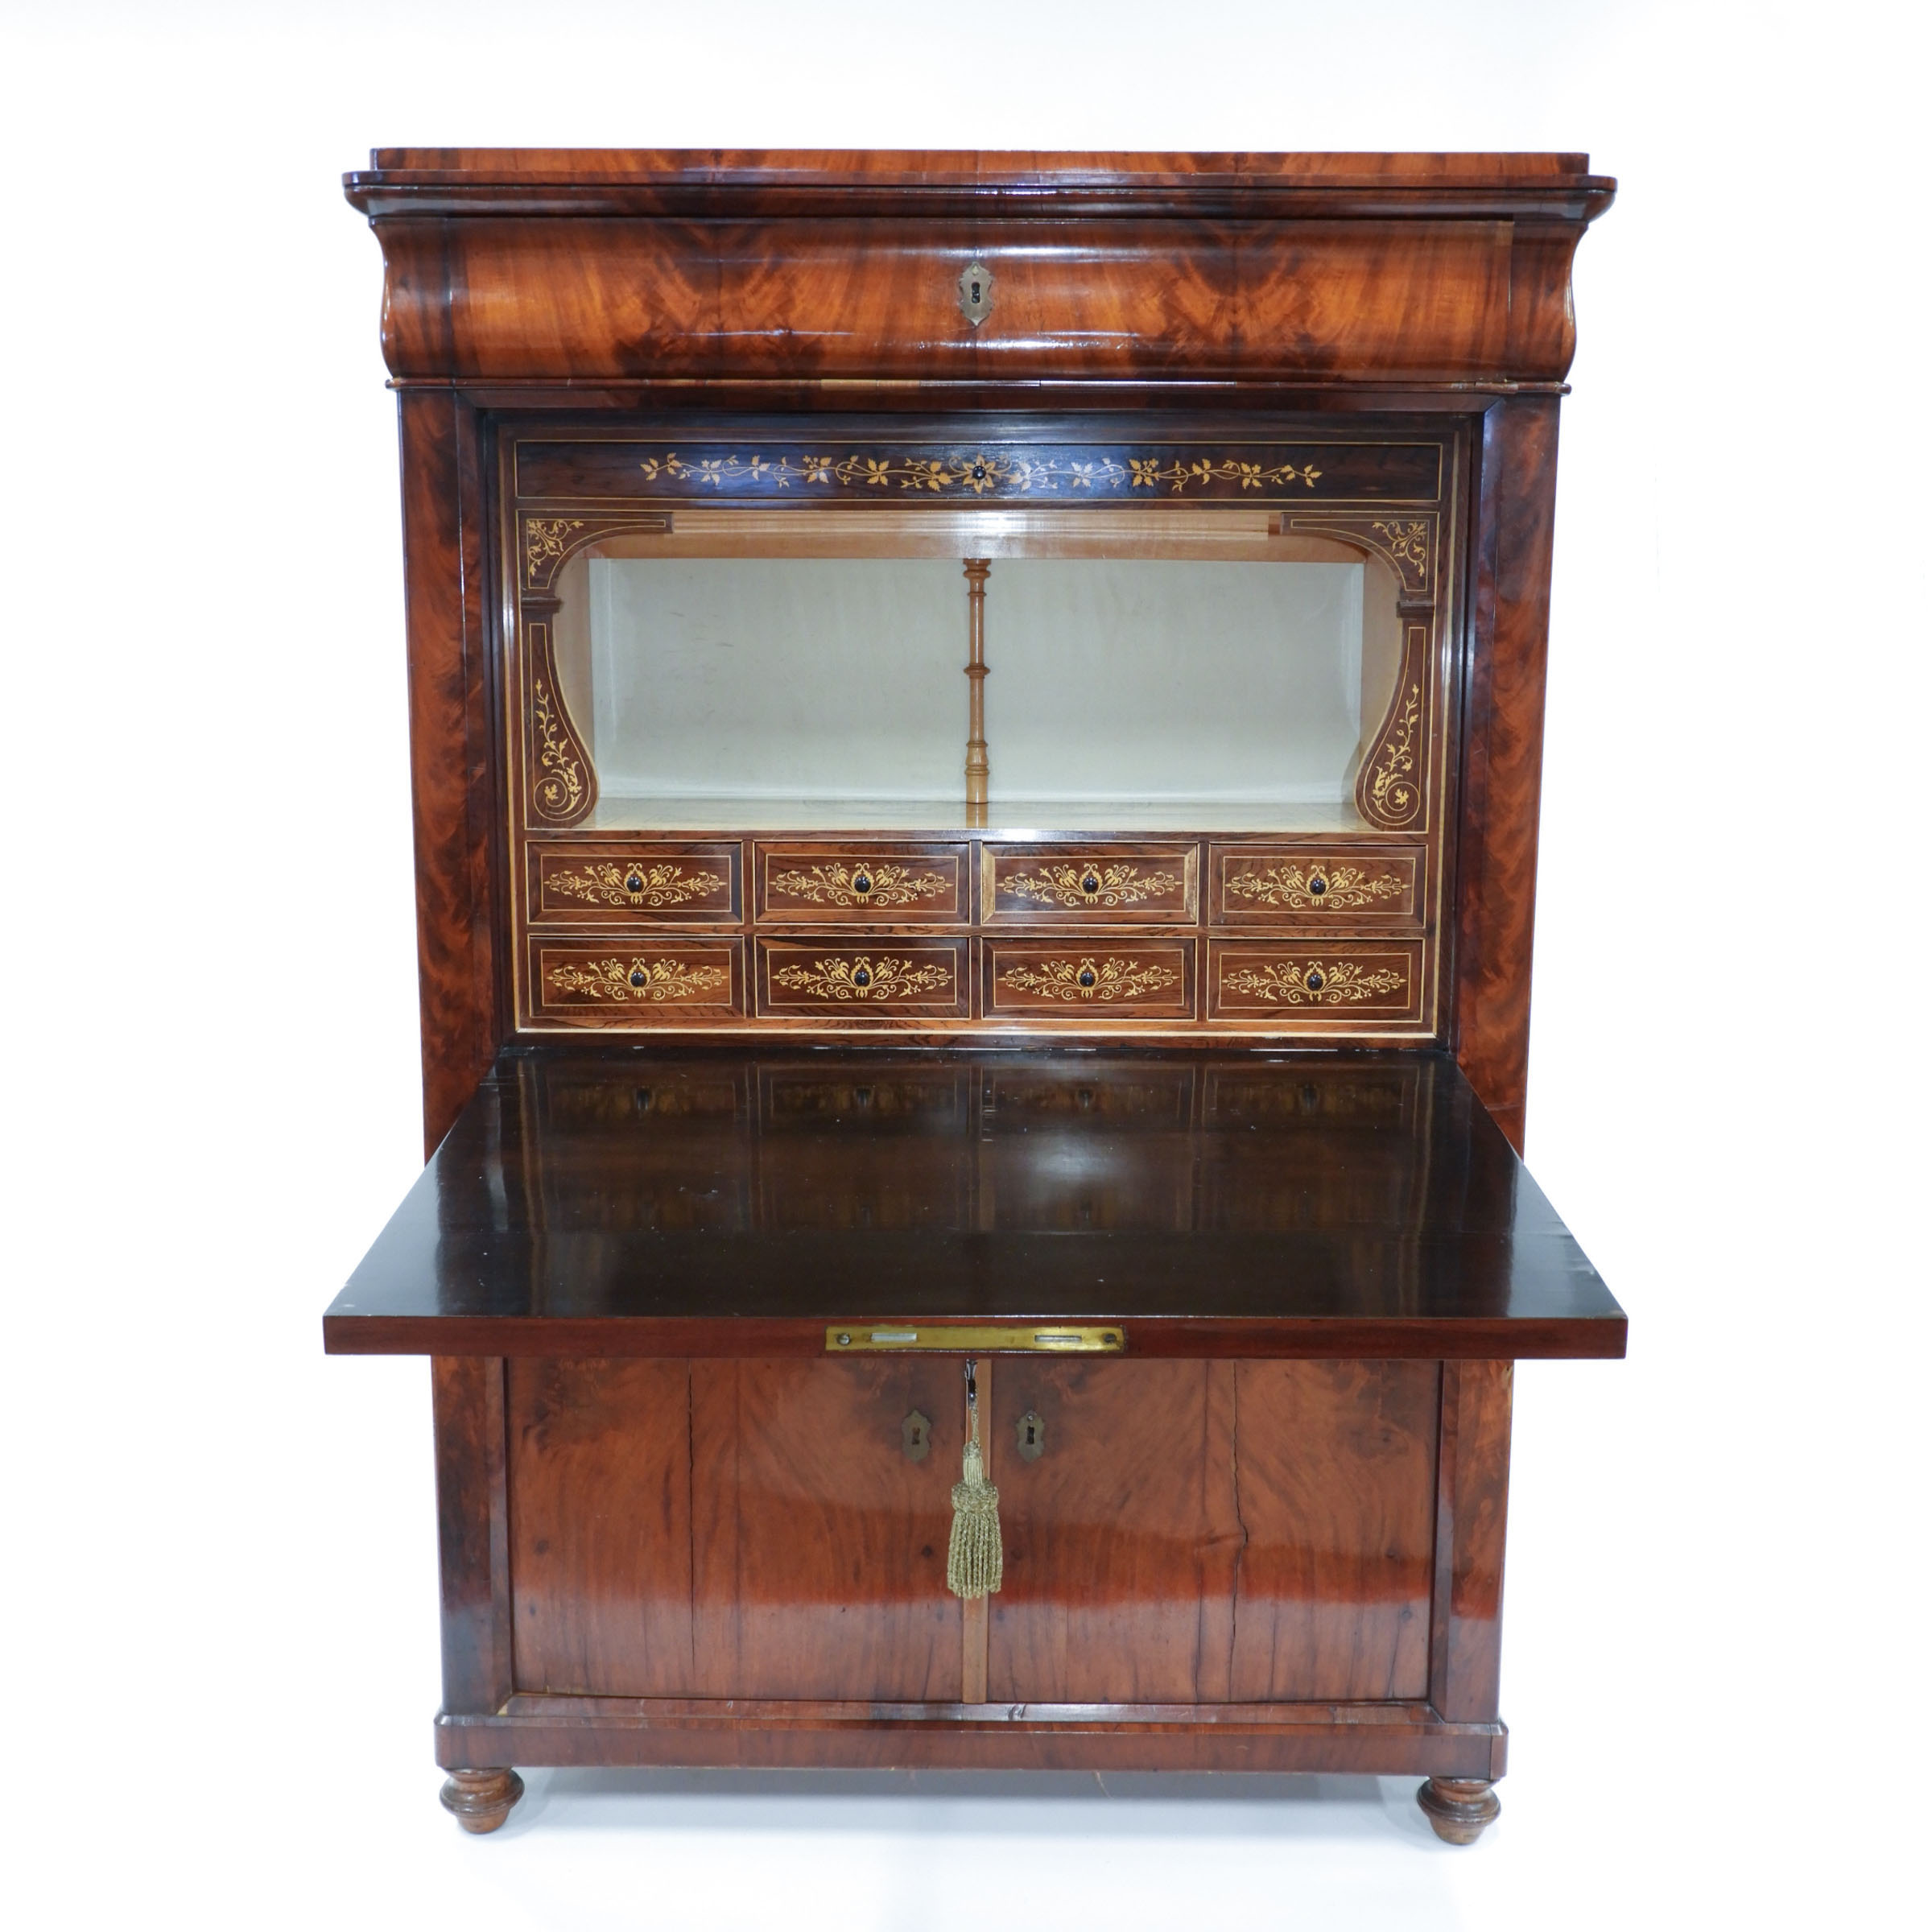 French Flame Mahogany Secretaire Abattant, 19th century and later